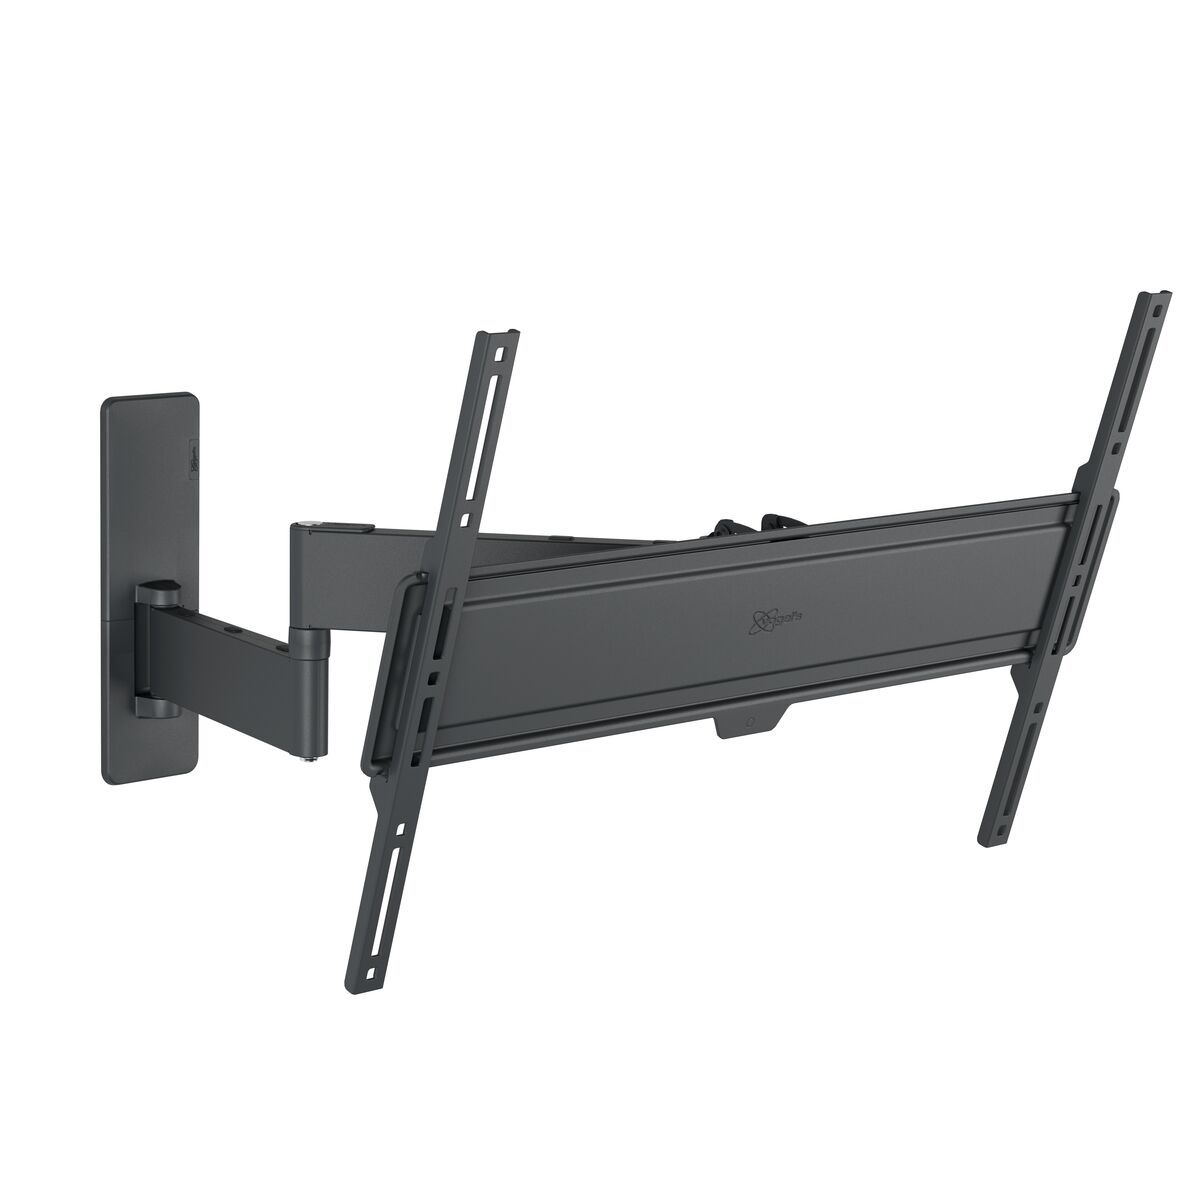 Vogel's TVM 1643 Full-Motion TV Wall Mount - Suitable for 40 up to 77 inch TVs - Full motion (up to 180°) swivel - Tilt up to 15° - Product